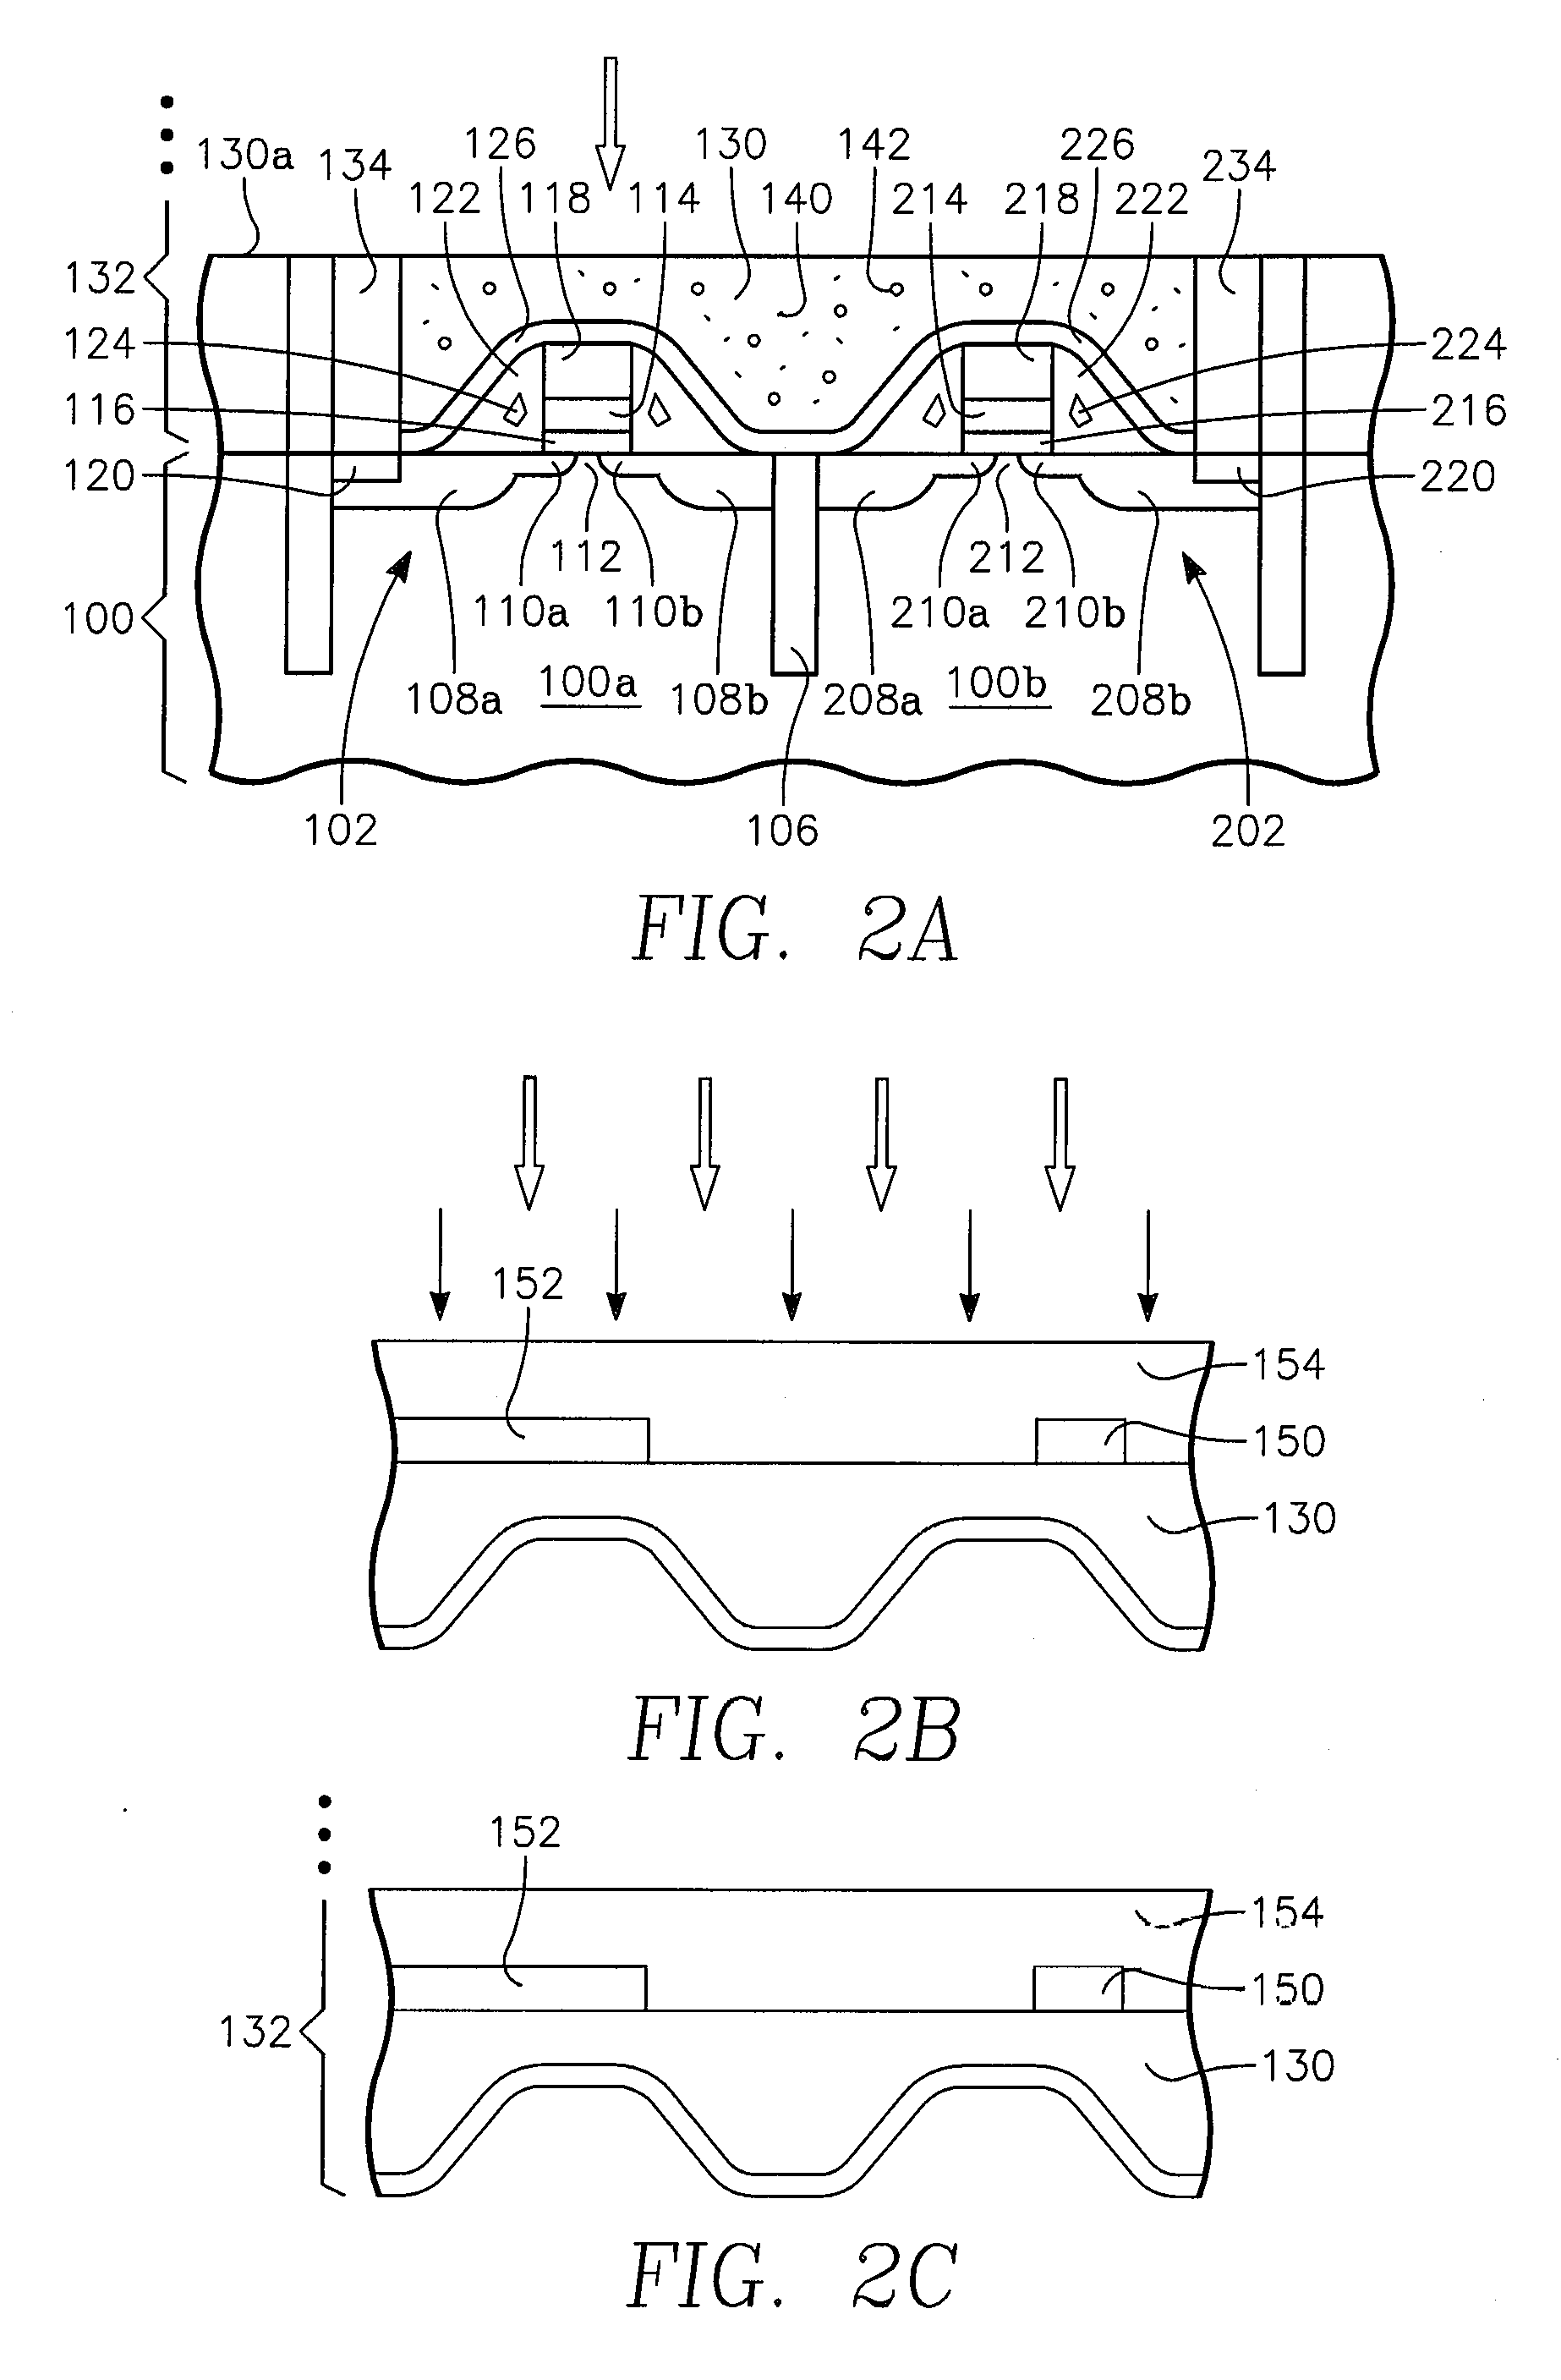 Ion implanted insulator material with reduced dielectric constant